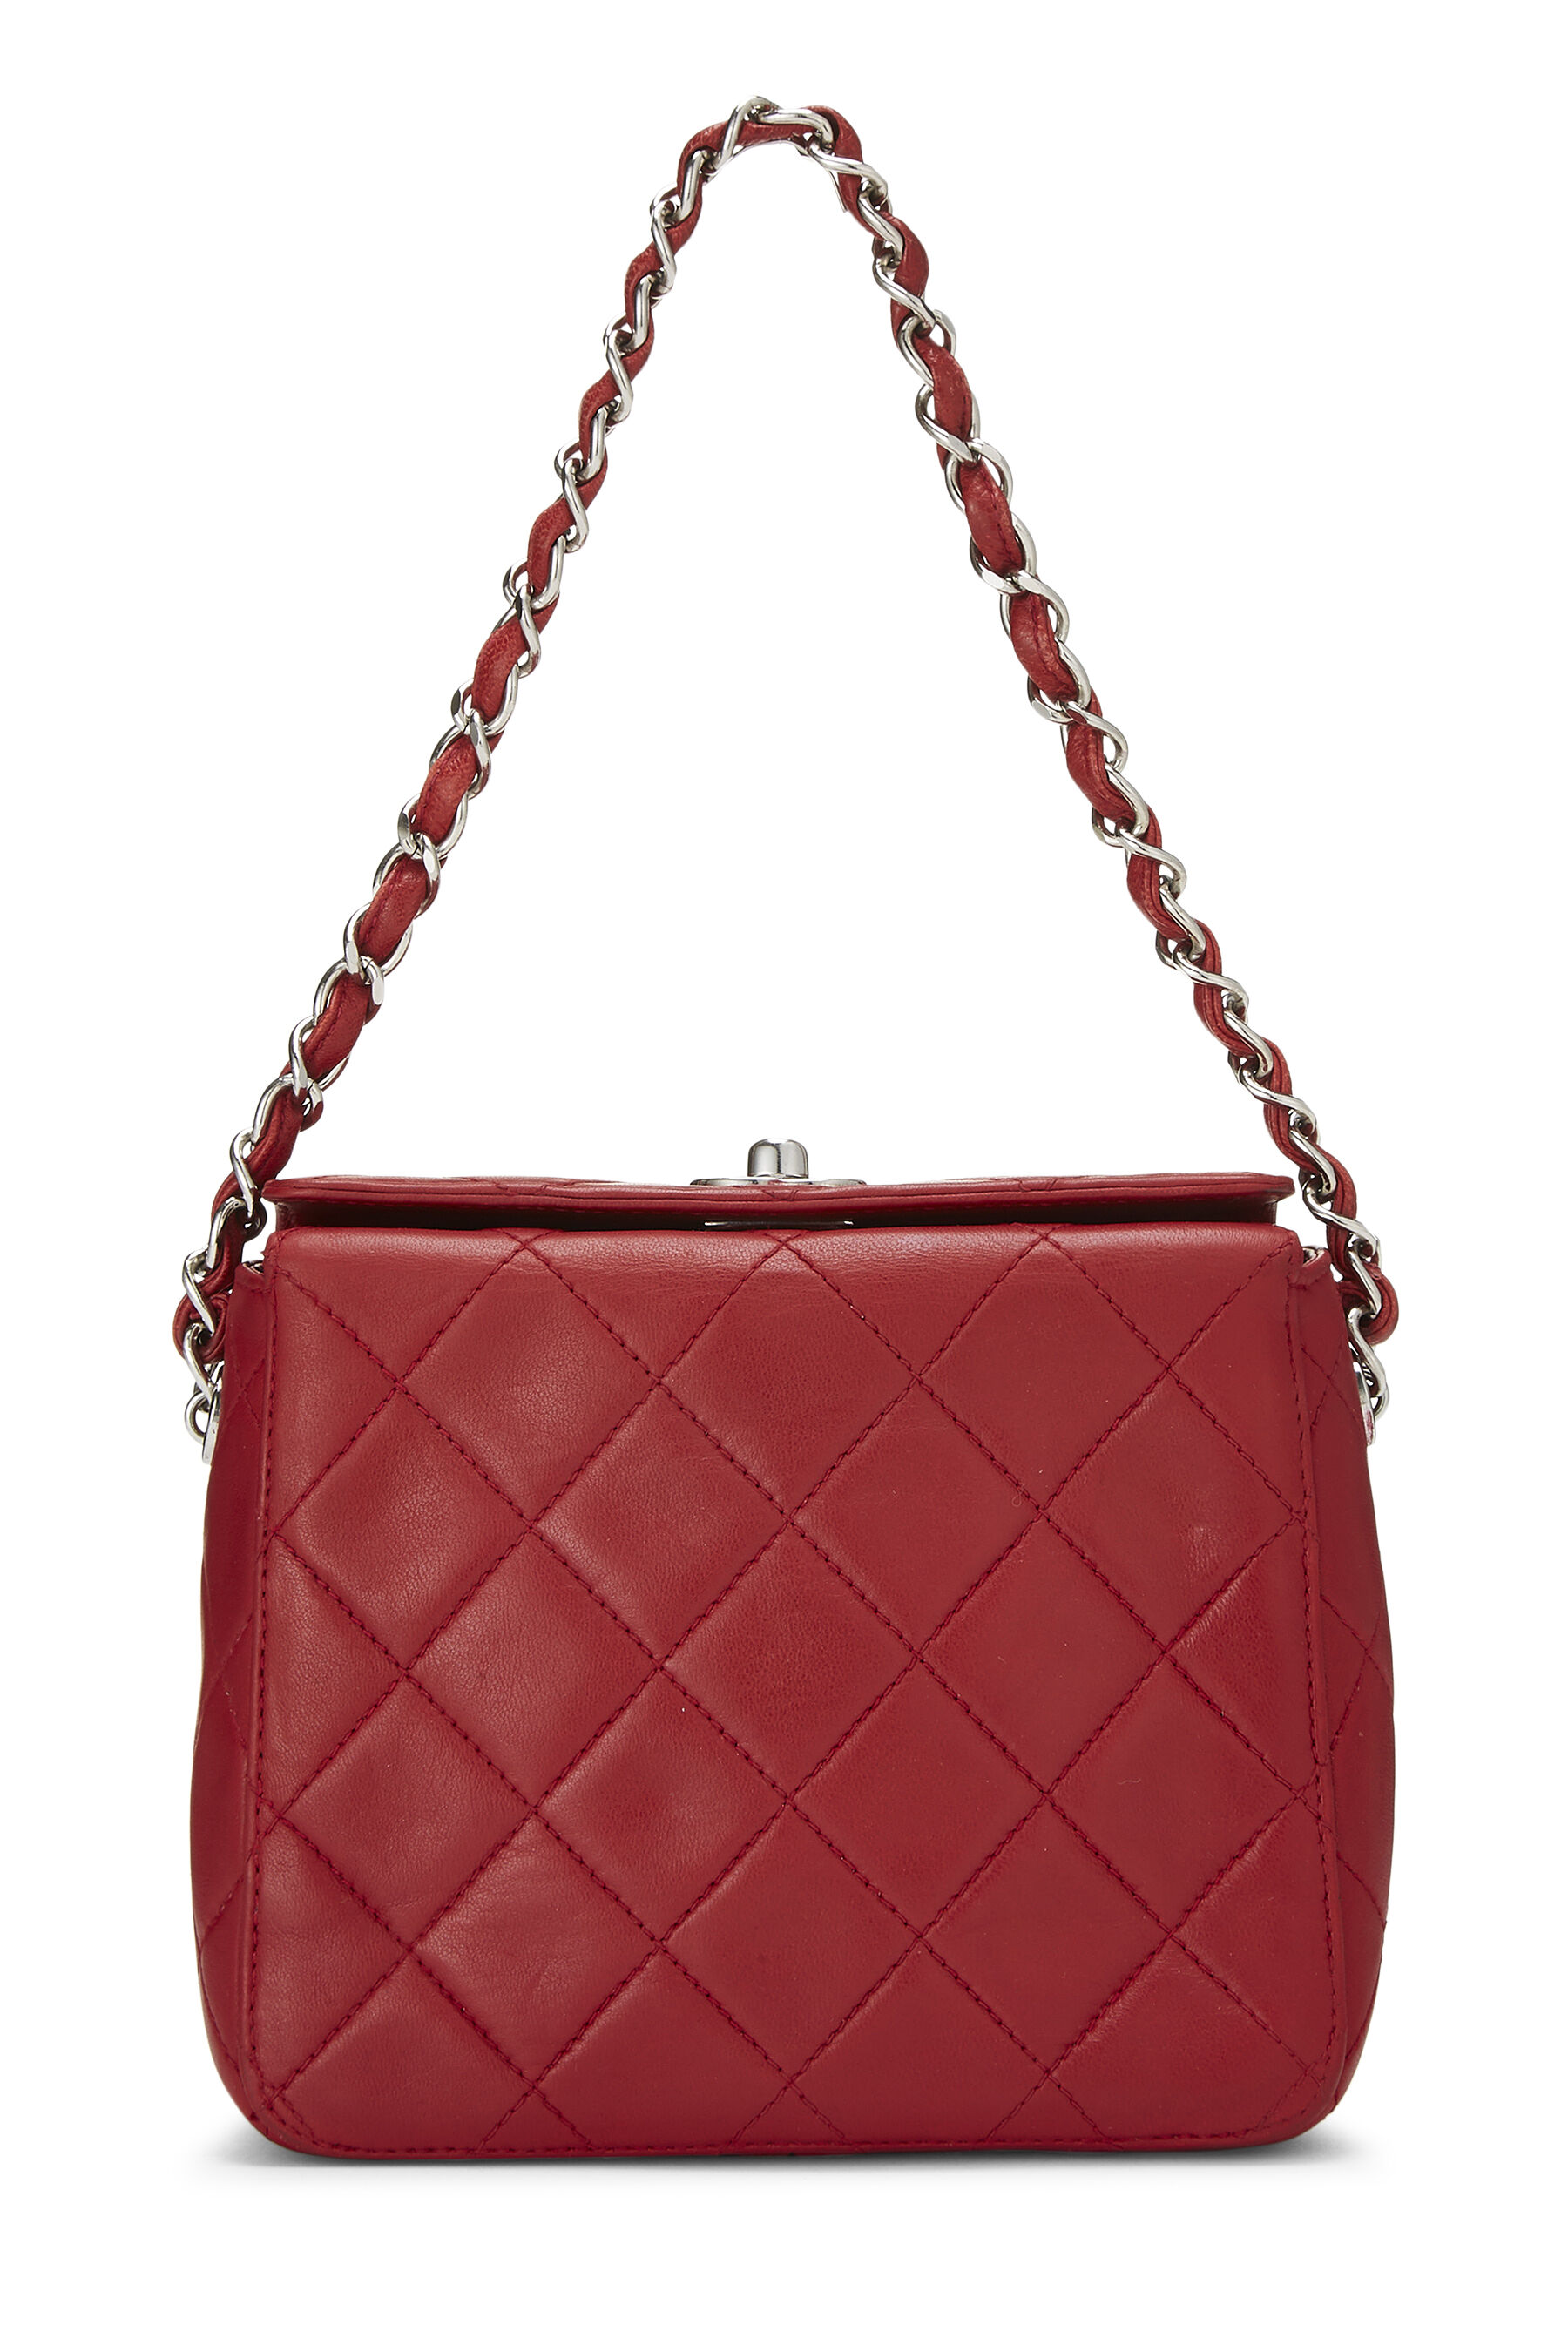 Chanel 90s Red Lambskin Quilted Mini CC Flap Messenger